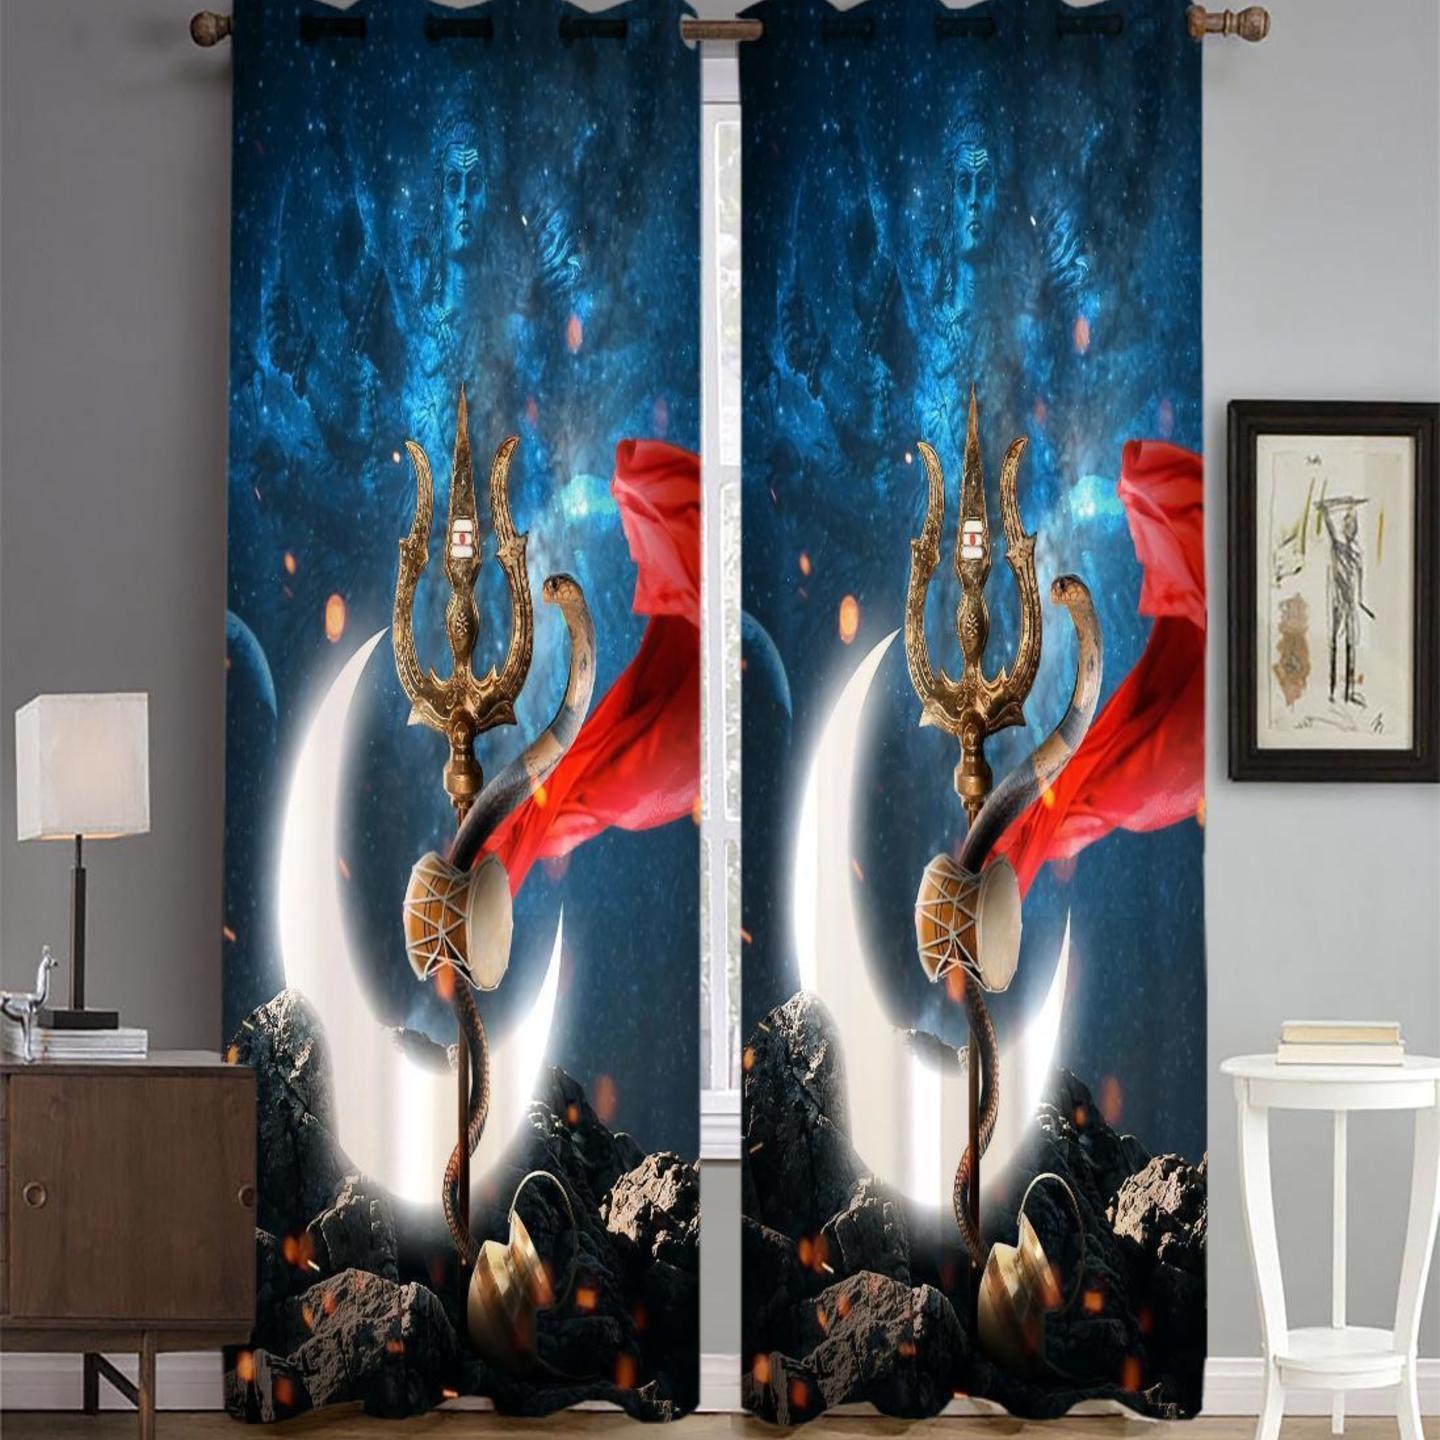 Handtex Home Digital Printed Curtain 3D Themed Polyester Curtains for Home Decor  Eyelet Grommet Panels for Living Room Balcony Bedroom, 4 x 9 Feet,Set of 2pcs  Trishul